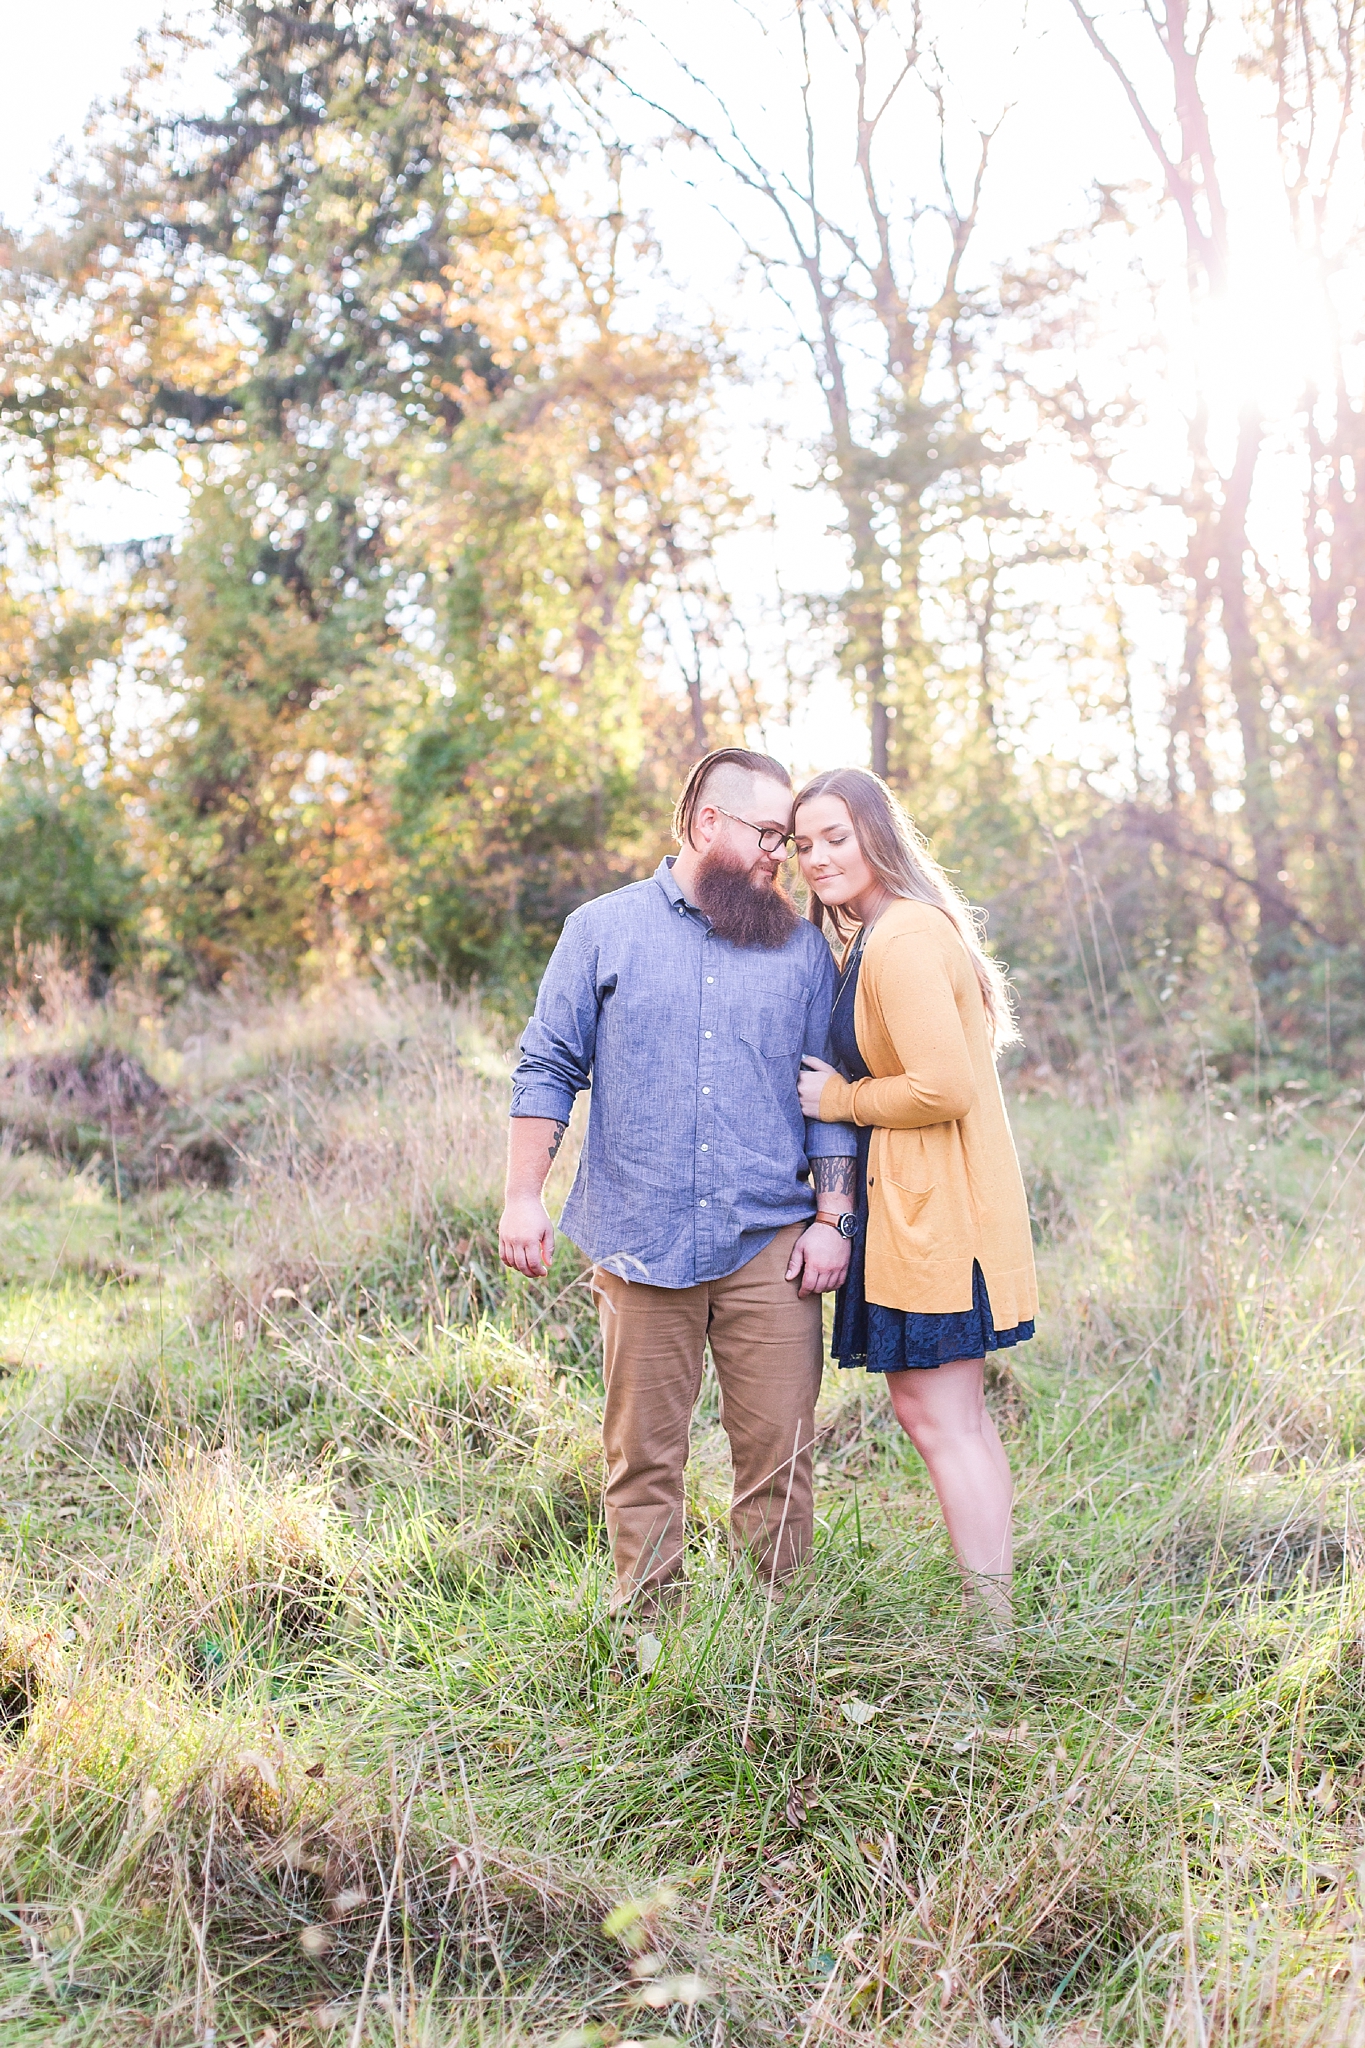 cozy-fall-engagement-photos-at-an-old-family-farm-in-monroe-michigan-by-courtney-carolyn-photography_0018.jpg